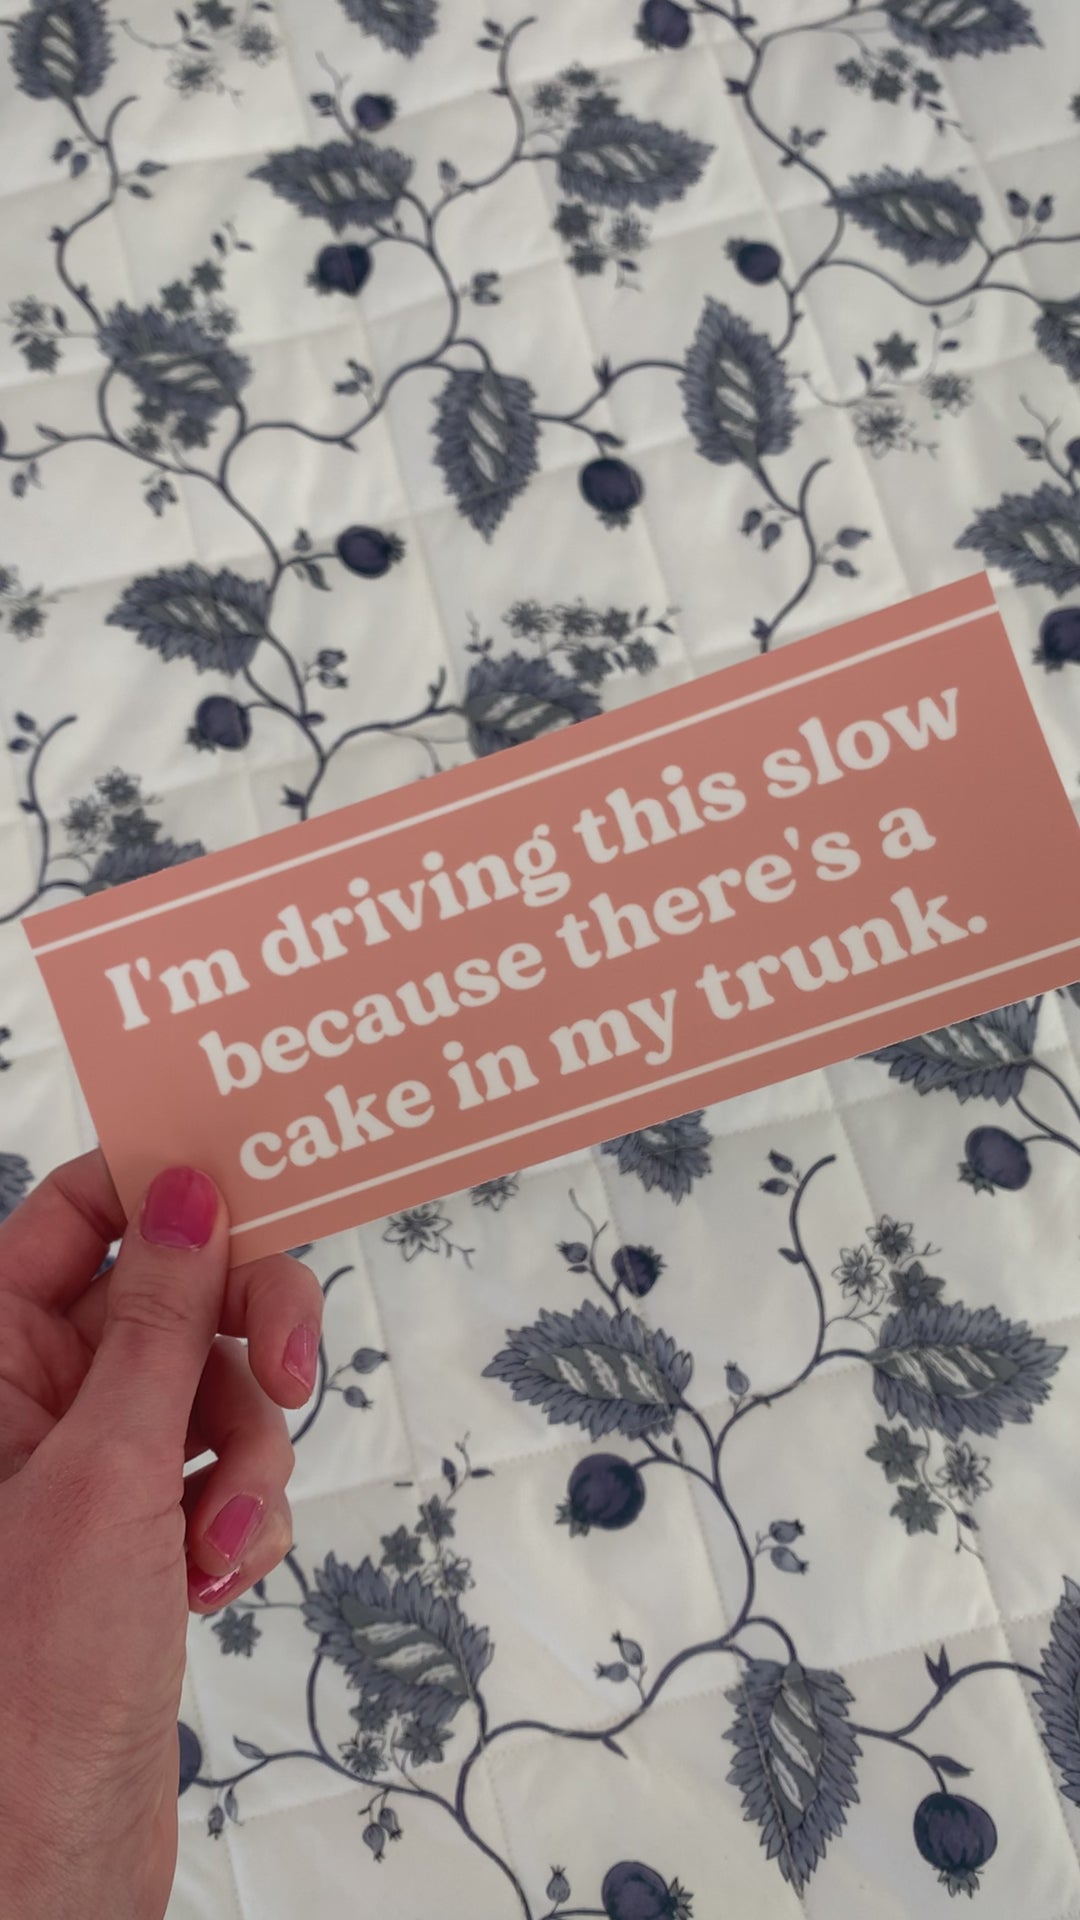 A woman holds a bumper sticker that reads "I'm driving this slow because there's a cake in my trunk."